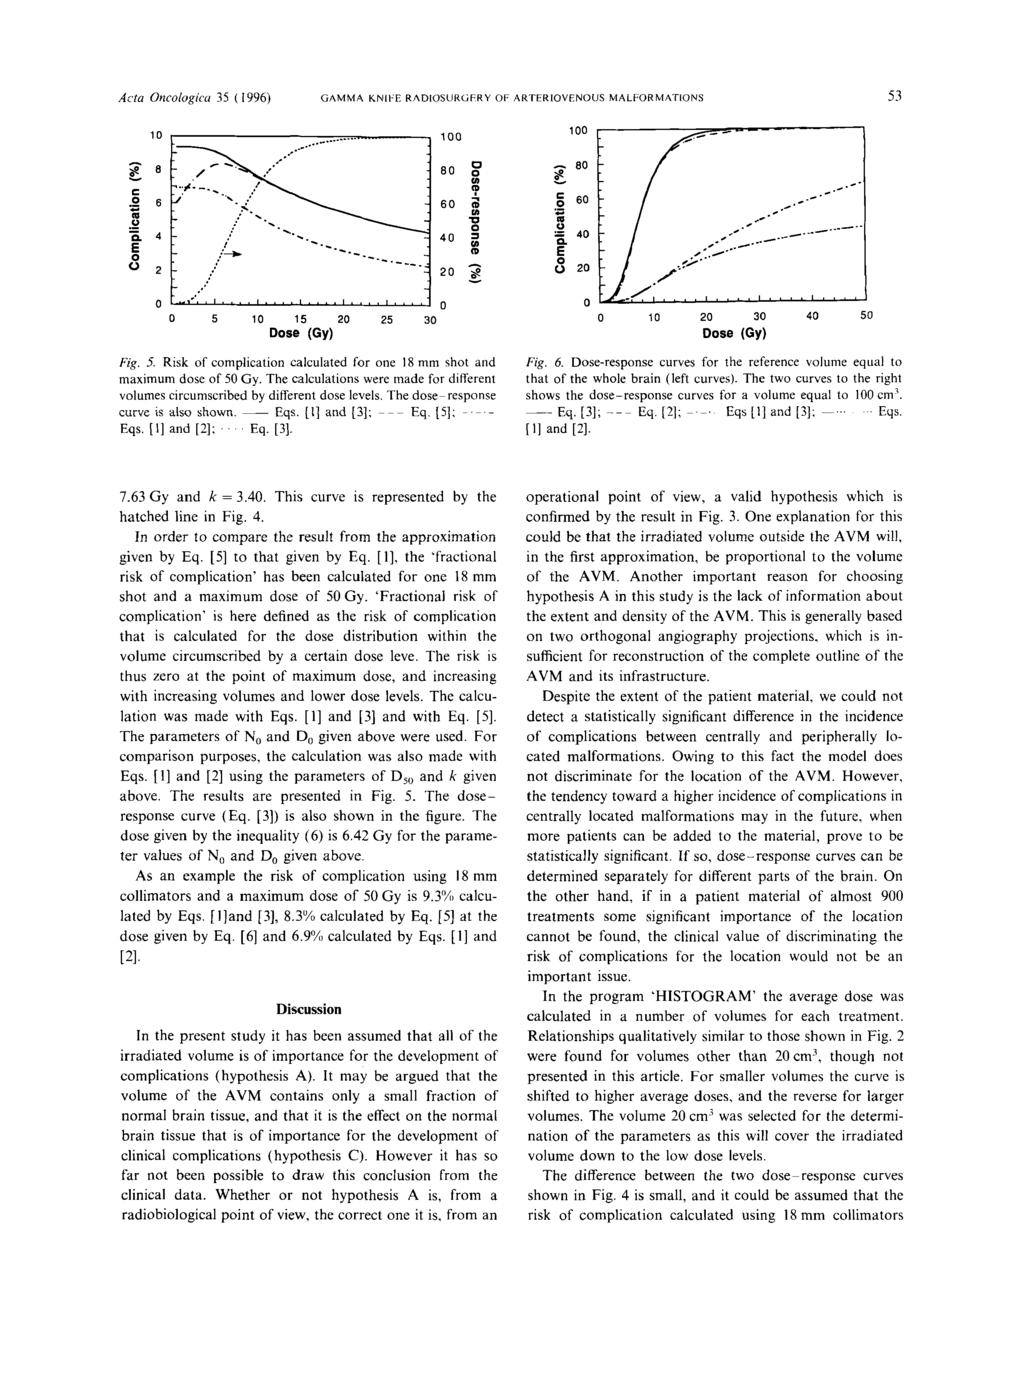 Actu Oncoiogicu 35 ( 1996) GAMMA KNItE RADIOSURCFRY OF ARTERIOVENOUS MALbORMATIONS 53 1 $ 8 - C.o 6.- c1 I n 4 5 2 5 1 15 2 25 3 Dose (Gy) 1 8 (d? 6 2 4 2 - (D 2 3 Fig. 5. Risk of complication calculated for one 18 mm shot and maximum dose of 5 Gy.